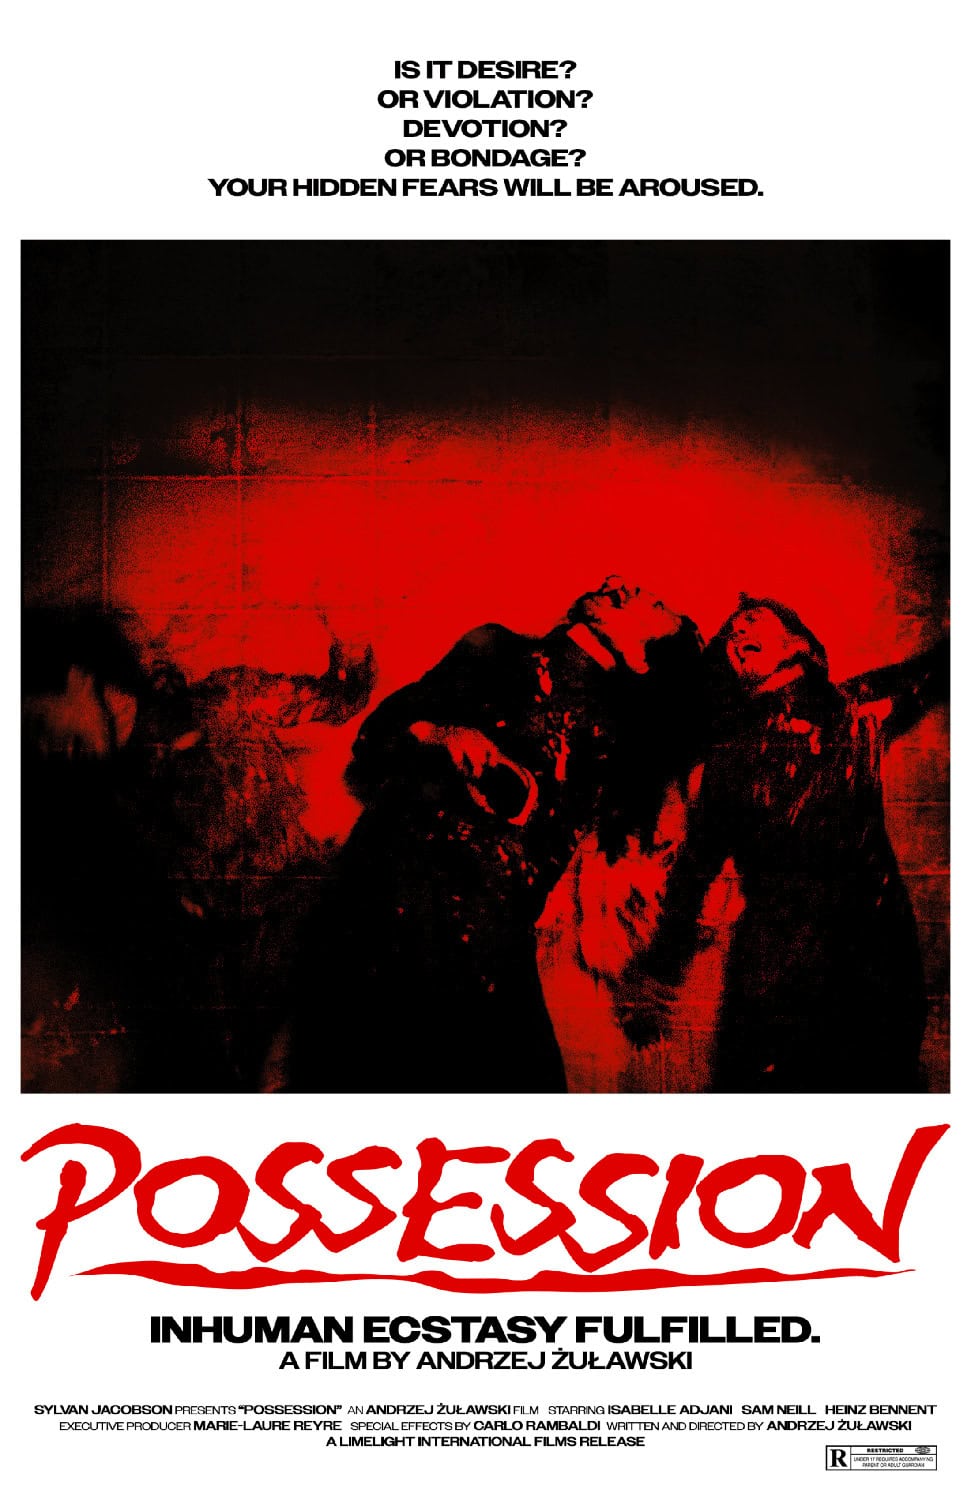 Robert Pattinson Teams Up with Smile Director for Possession Remake